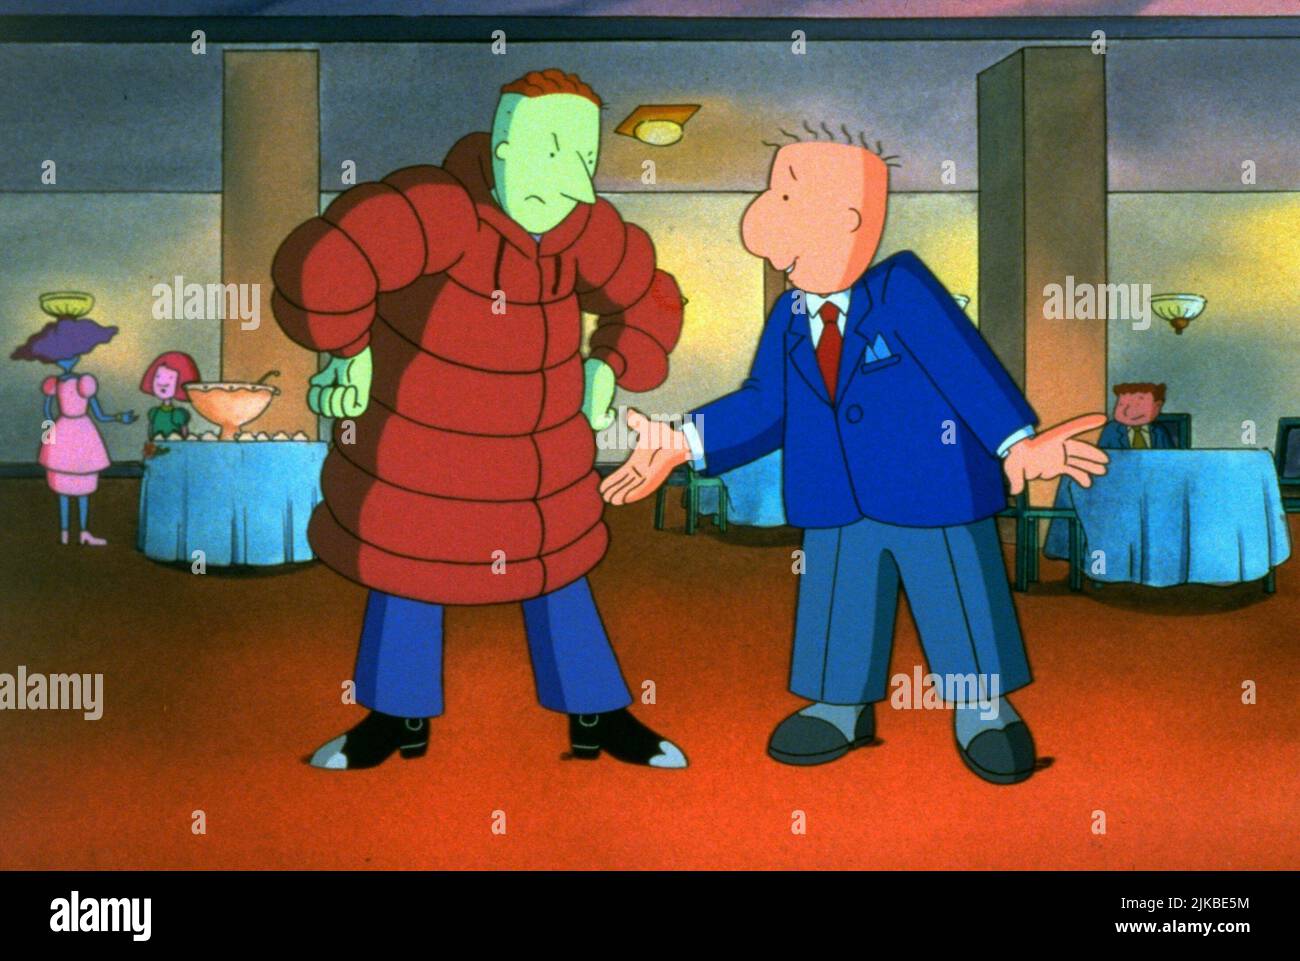 Roger Klotz and Doug Funnie Film DougS 1st Movie (1999) Characters Roger Klotz and Doug Funnie Director Maurice Joyce 19 March 1999 **WARNING** This Photograph is for editorial use only and is